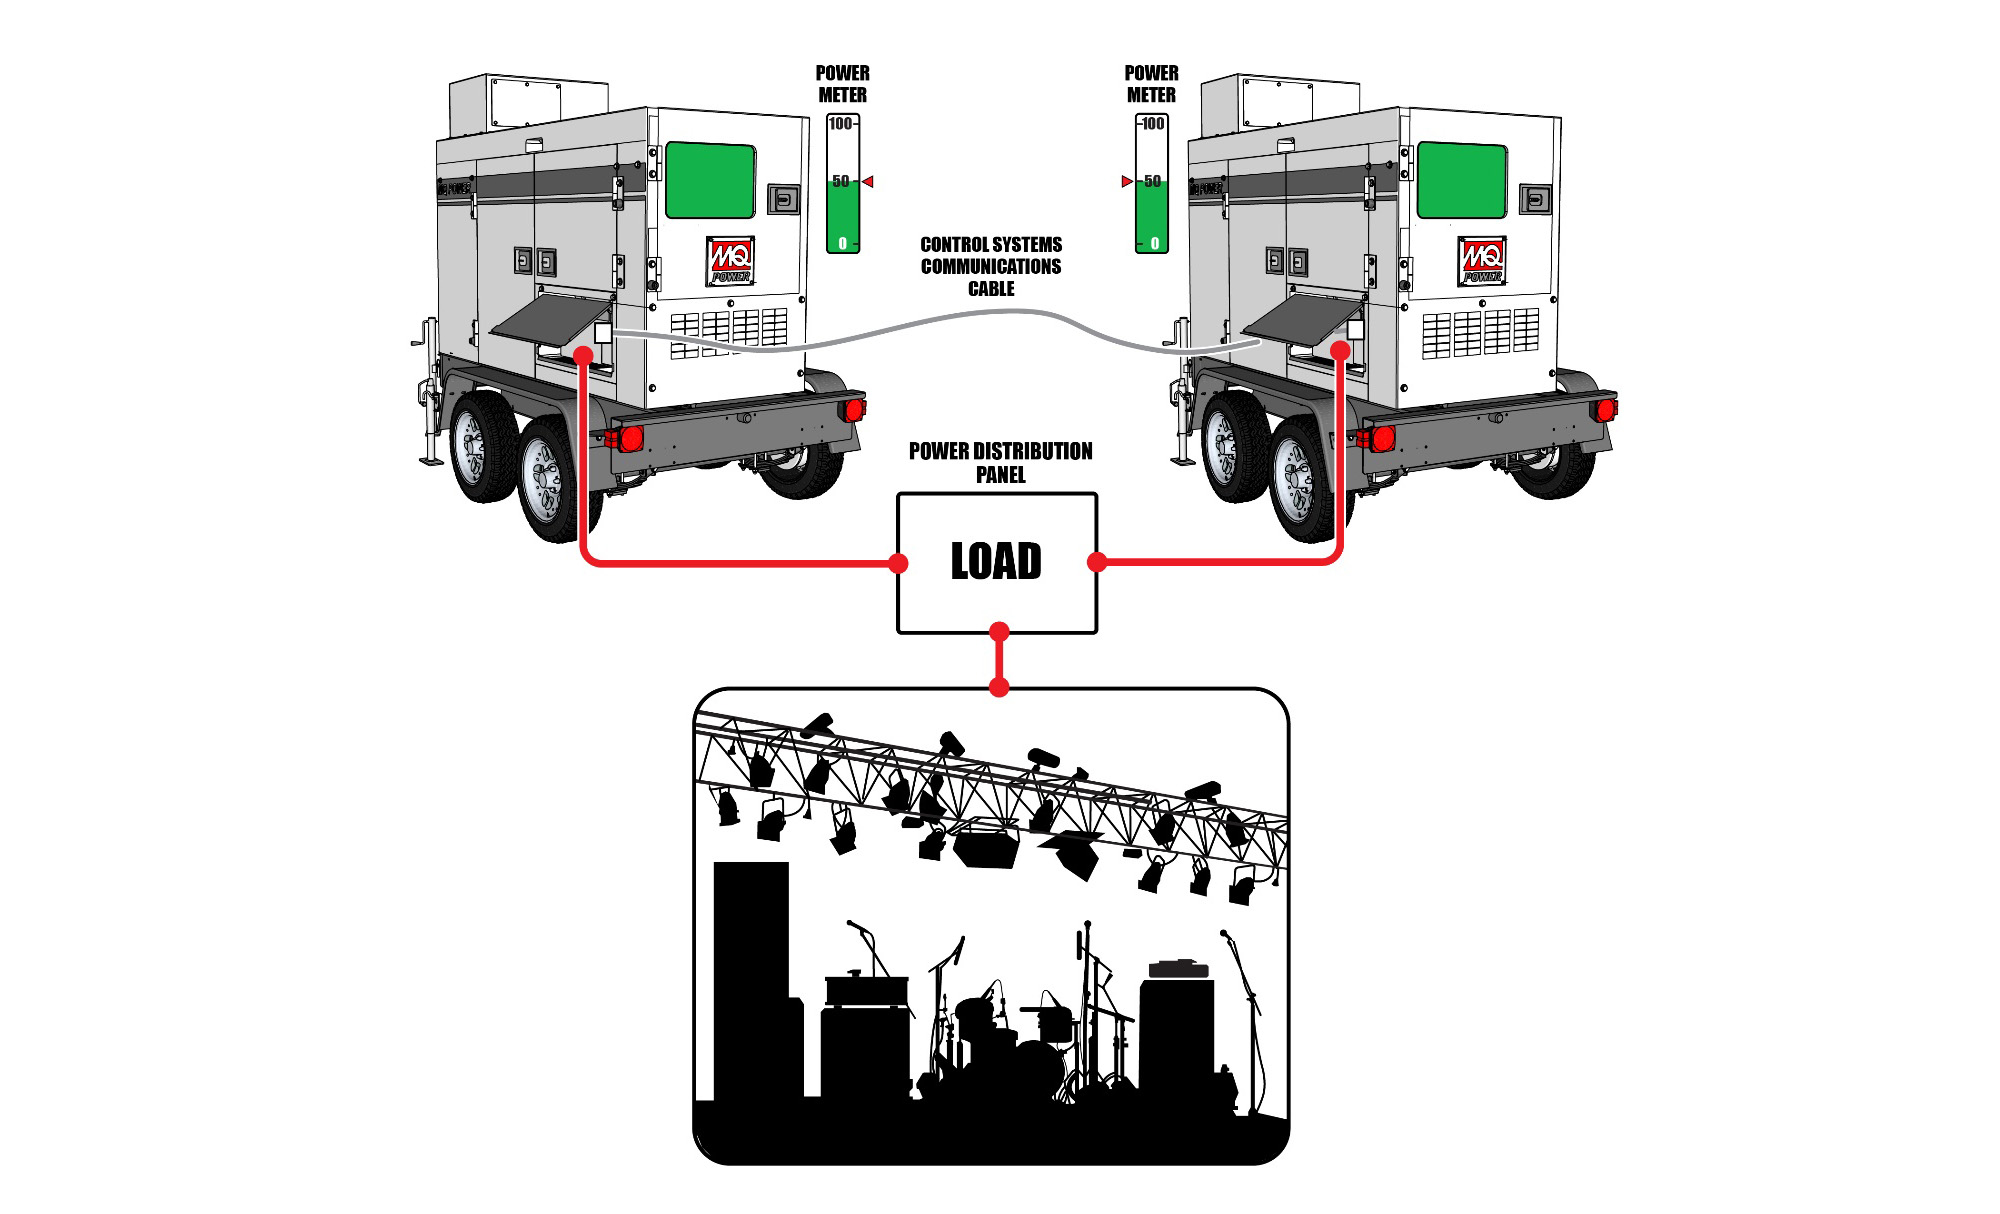 A live concert venue is powered by two portable generators connected in parallel for redundancy. Each generator can handle the entire power demand on it's own.